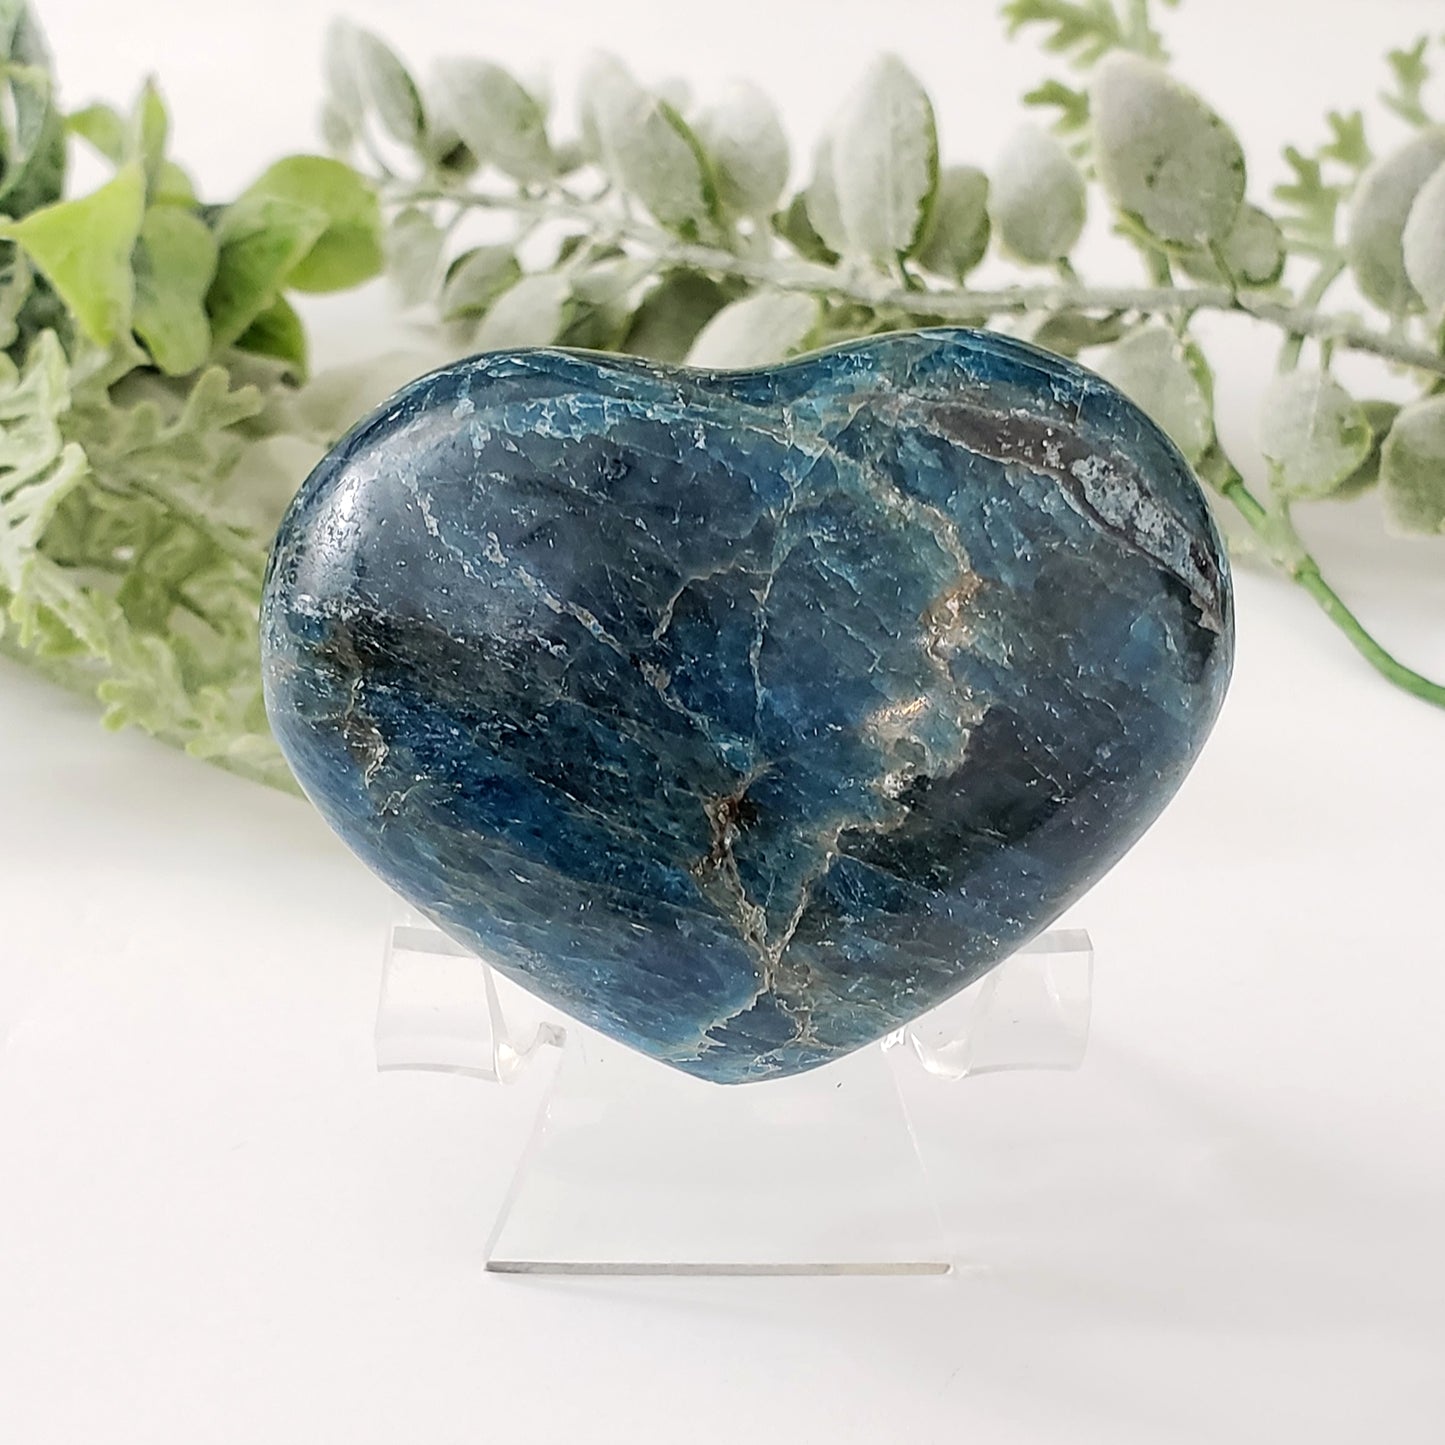 Authentic Blue Apatite Heart-Shaped Crystal - Natural Beauty